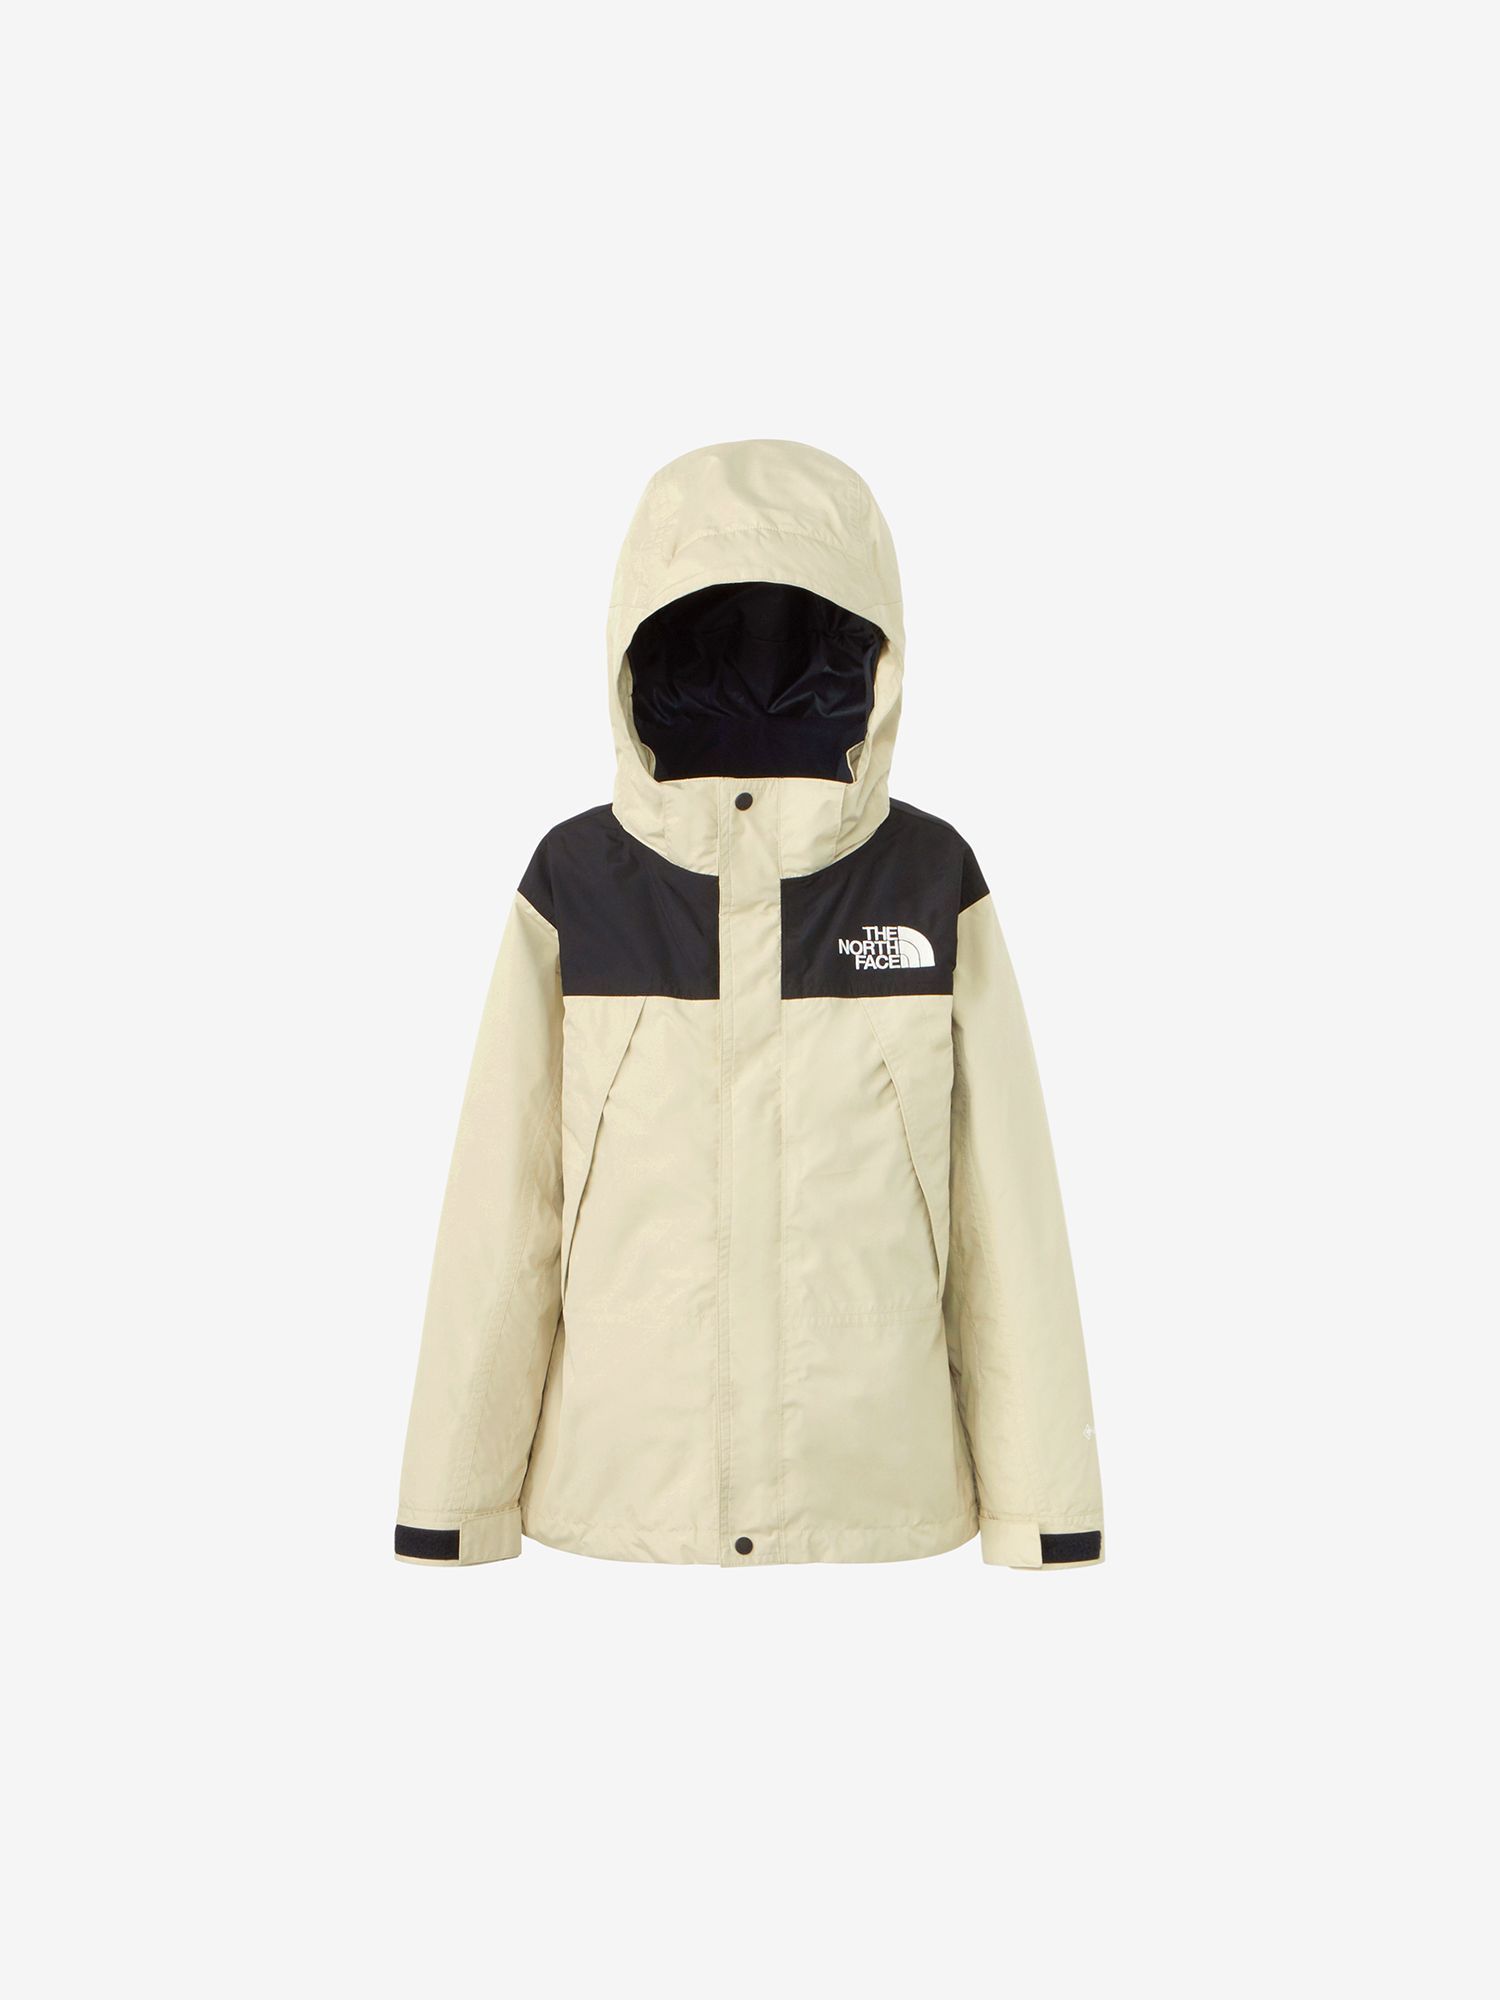 THE NORTH FACE KIDS